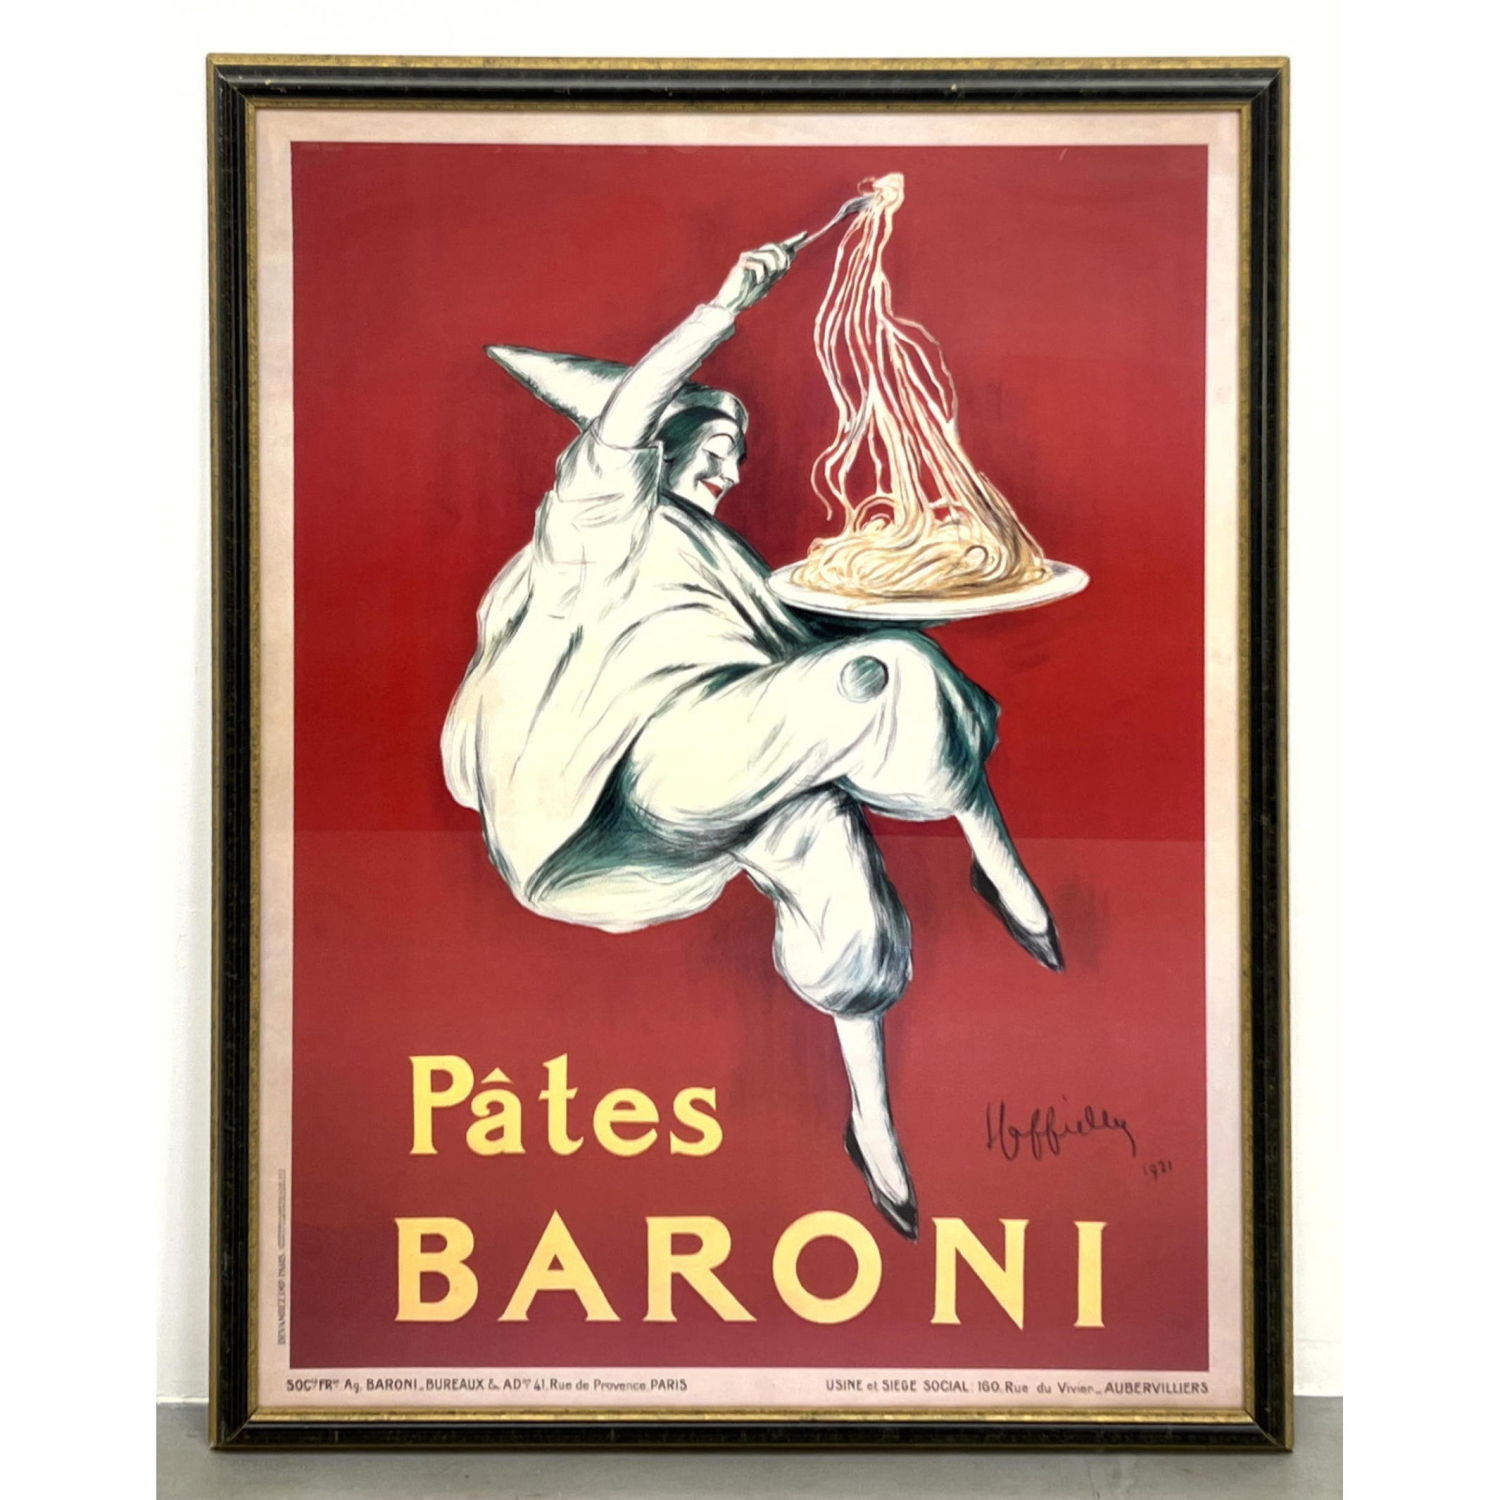 PATES BARONI French Poster. 

Dimensions: